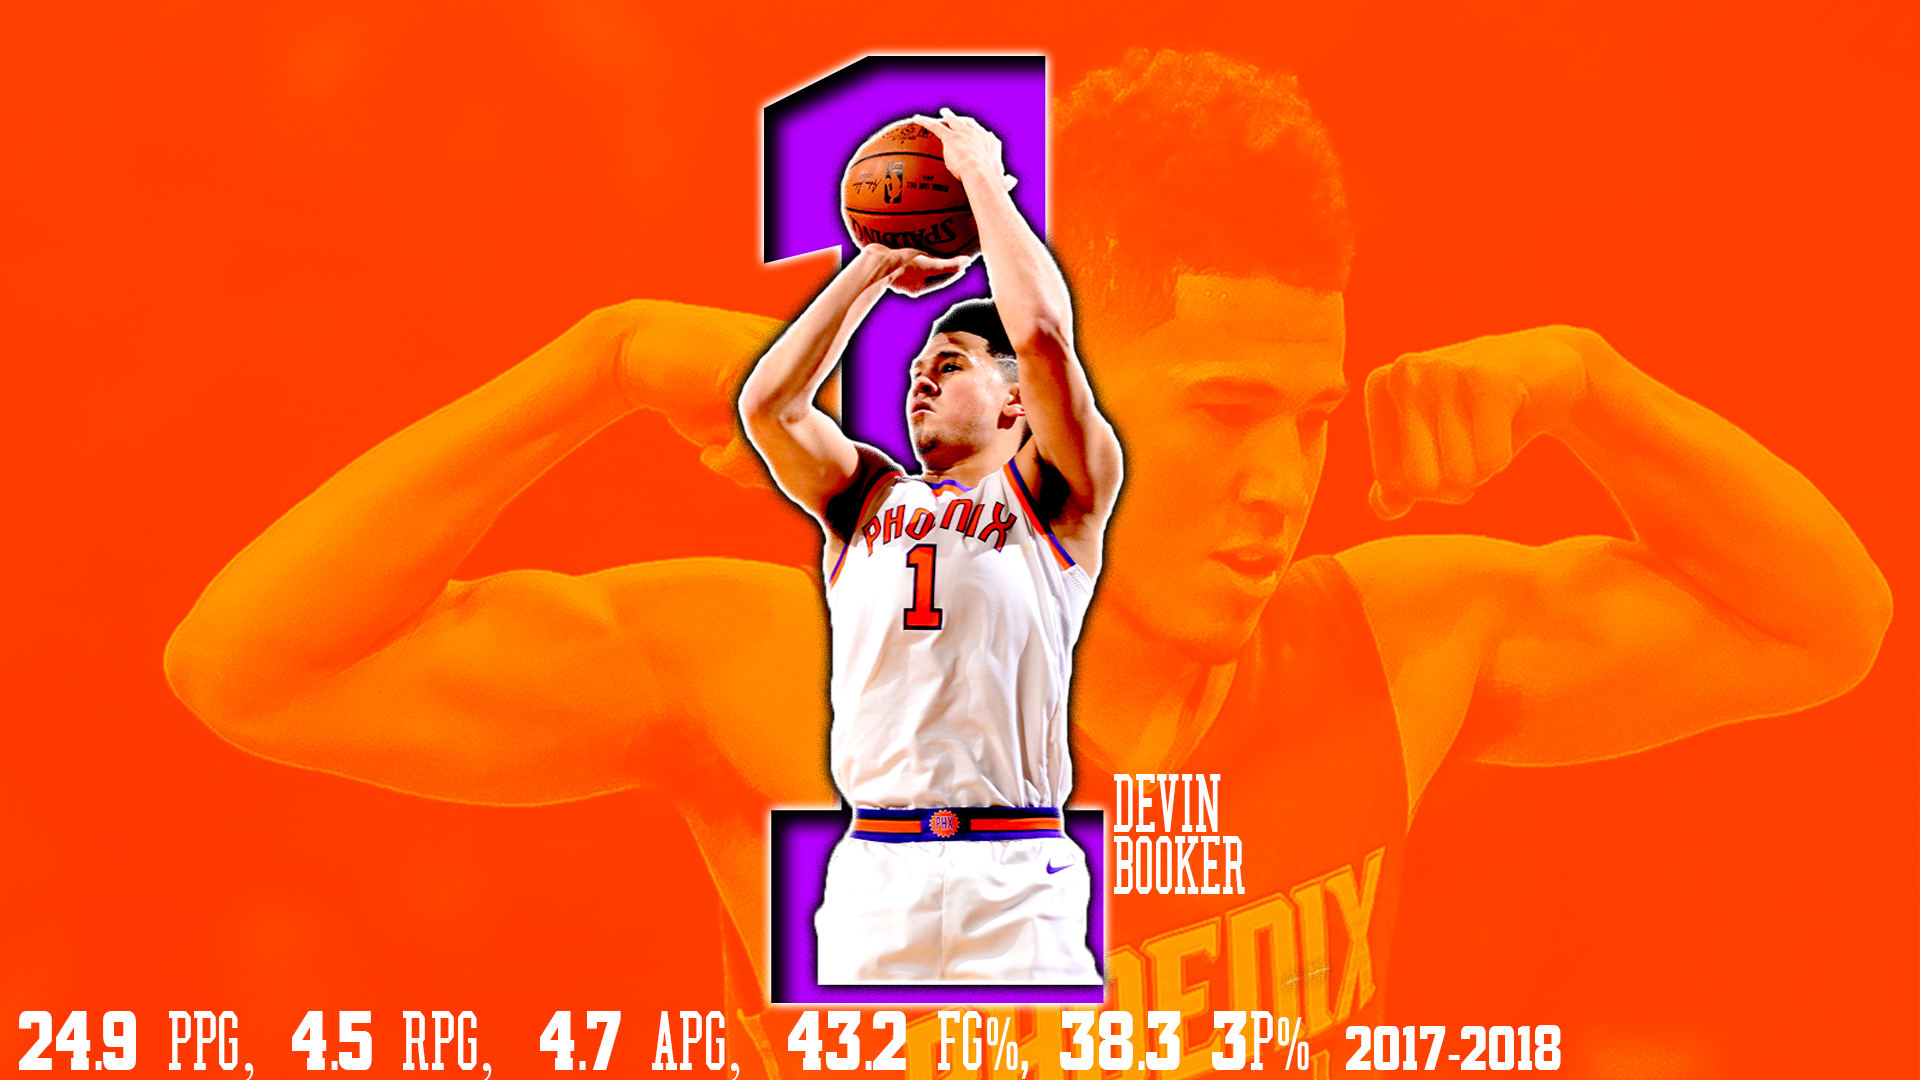 First Try doing wallpaper, here is Devin Booker